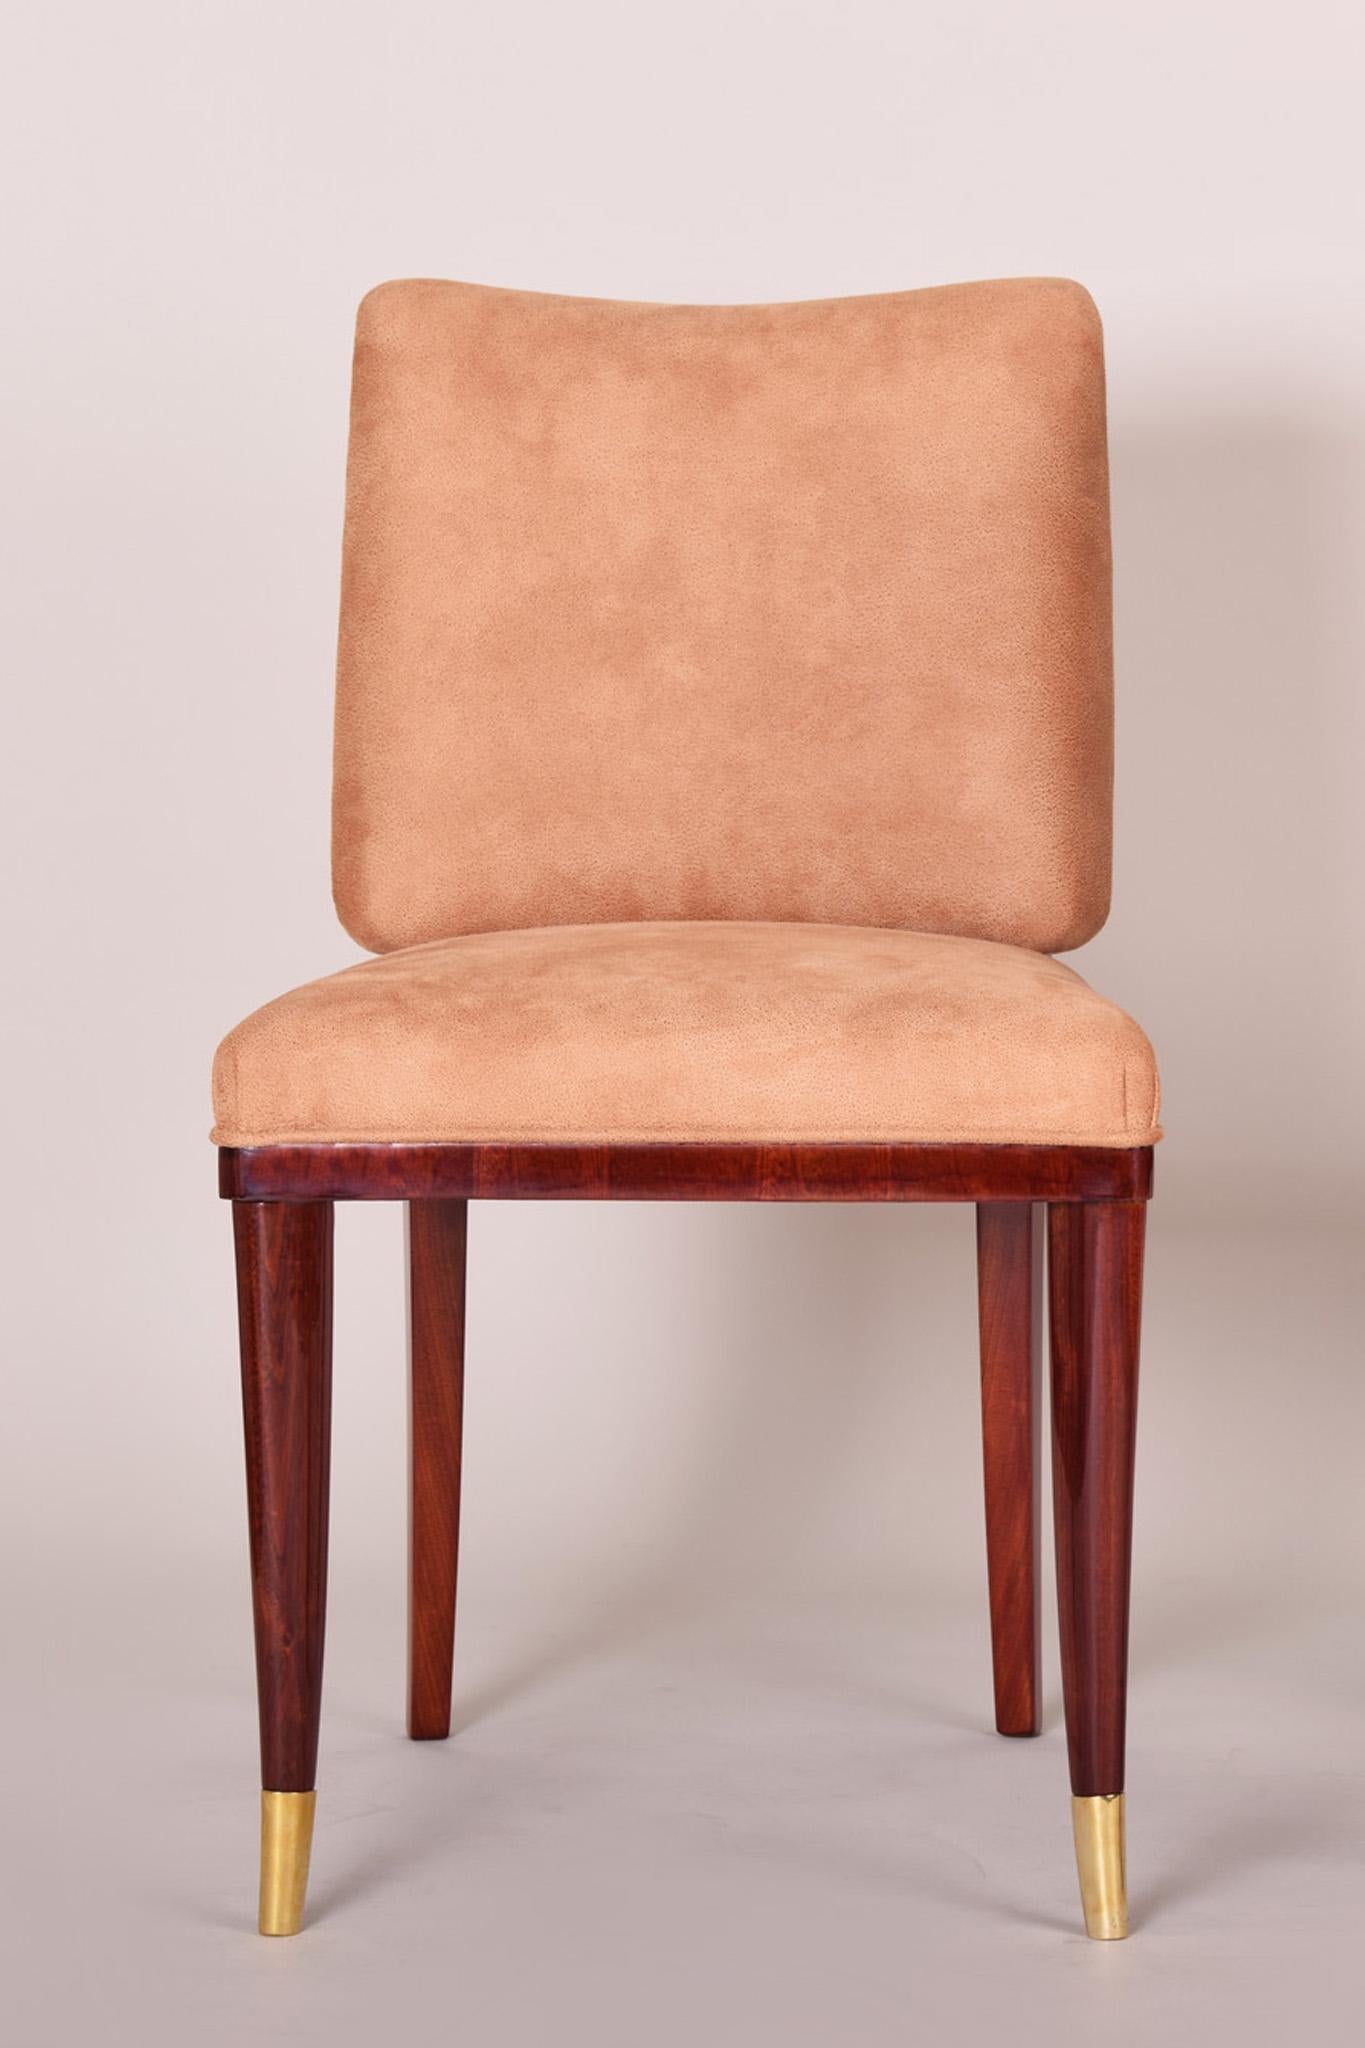 Restored Beige French Art Deco Chair, Designed by Jules Leleu, 1920-1929 In Good Condition For Sale In Horomerice, CZ